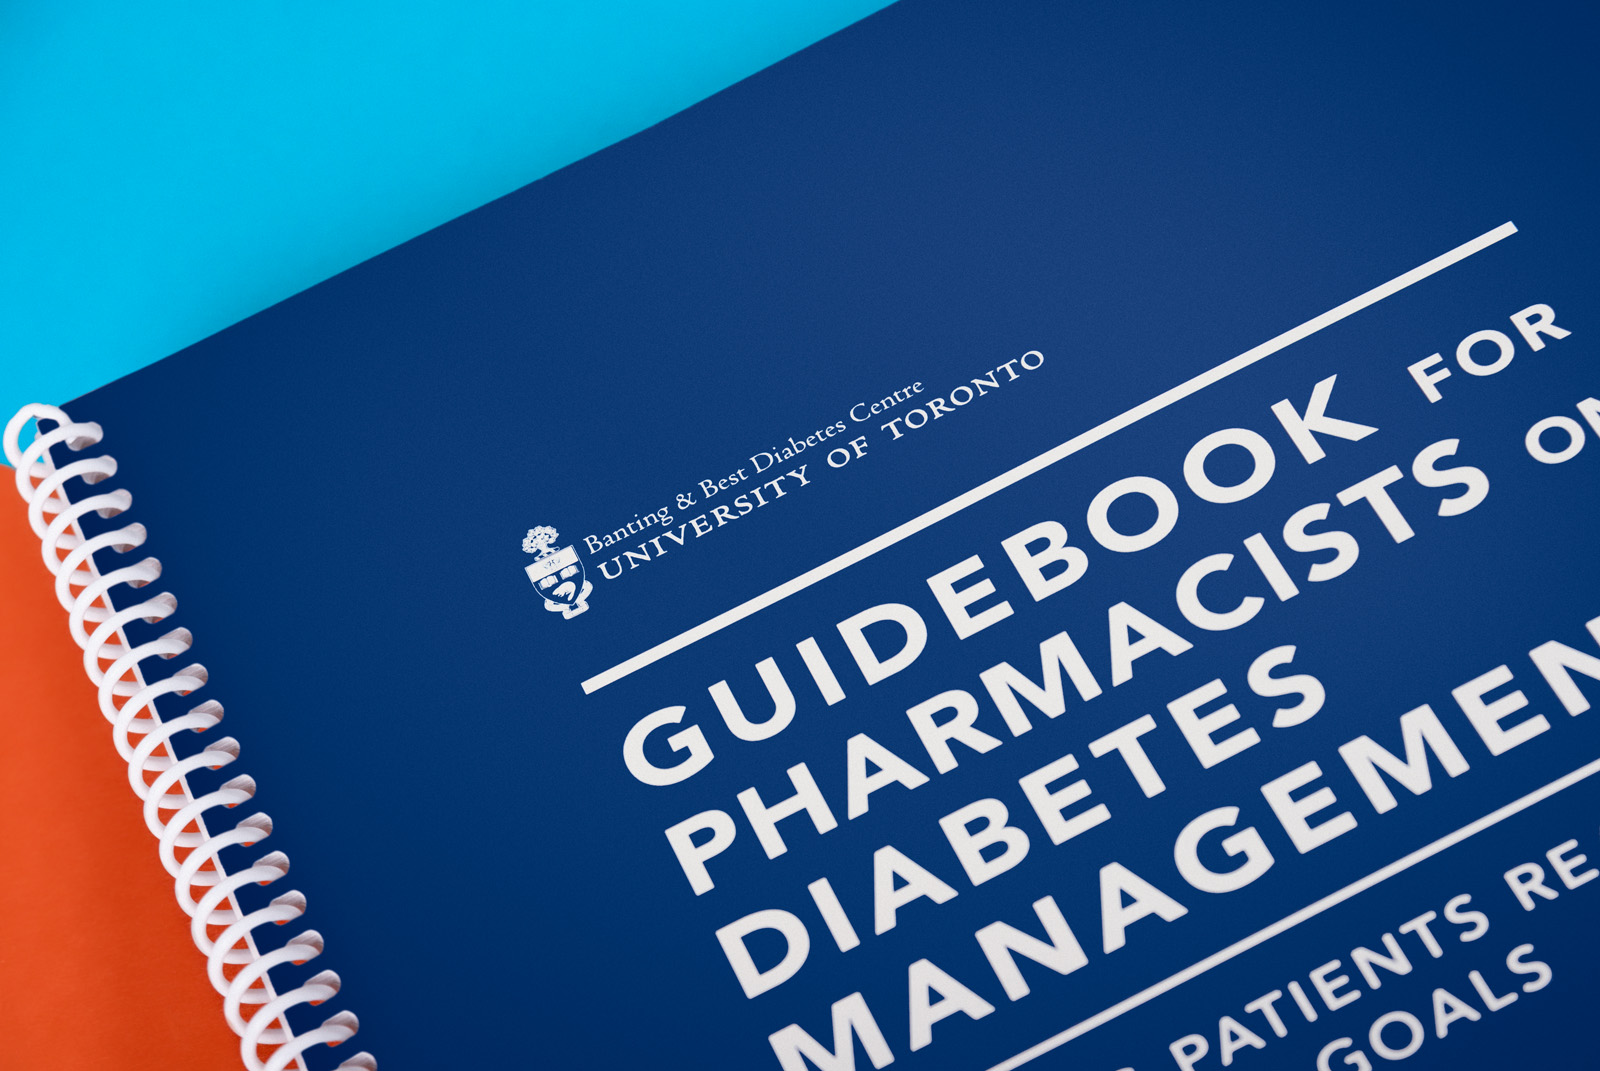 Guidebook for Pharmacists on Diabetes Management